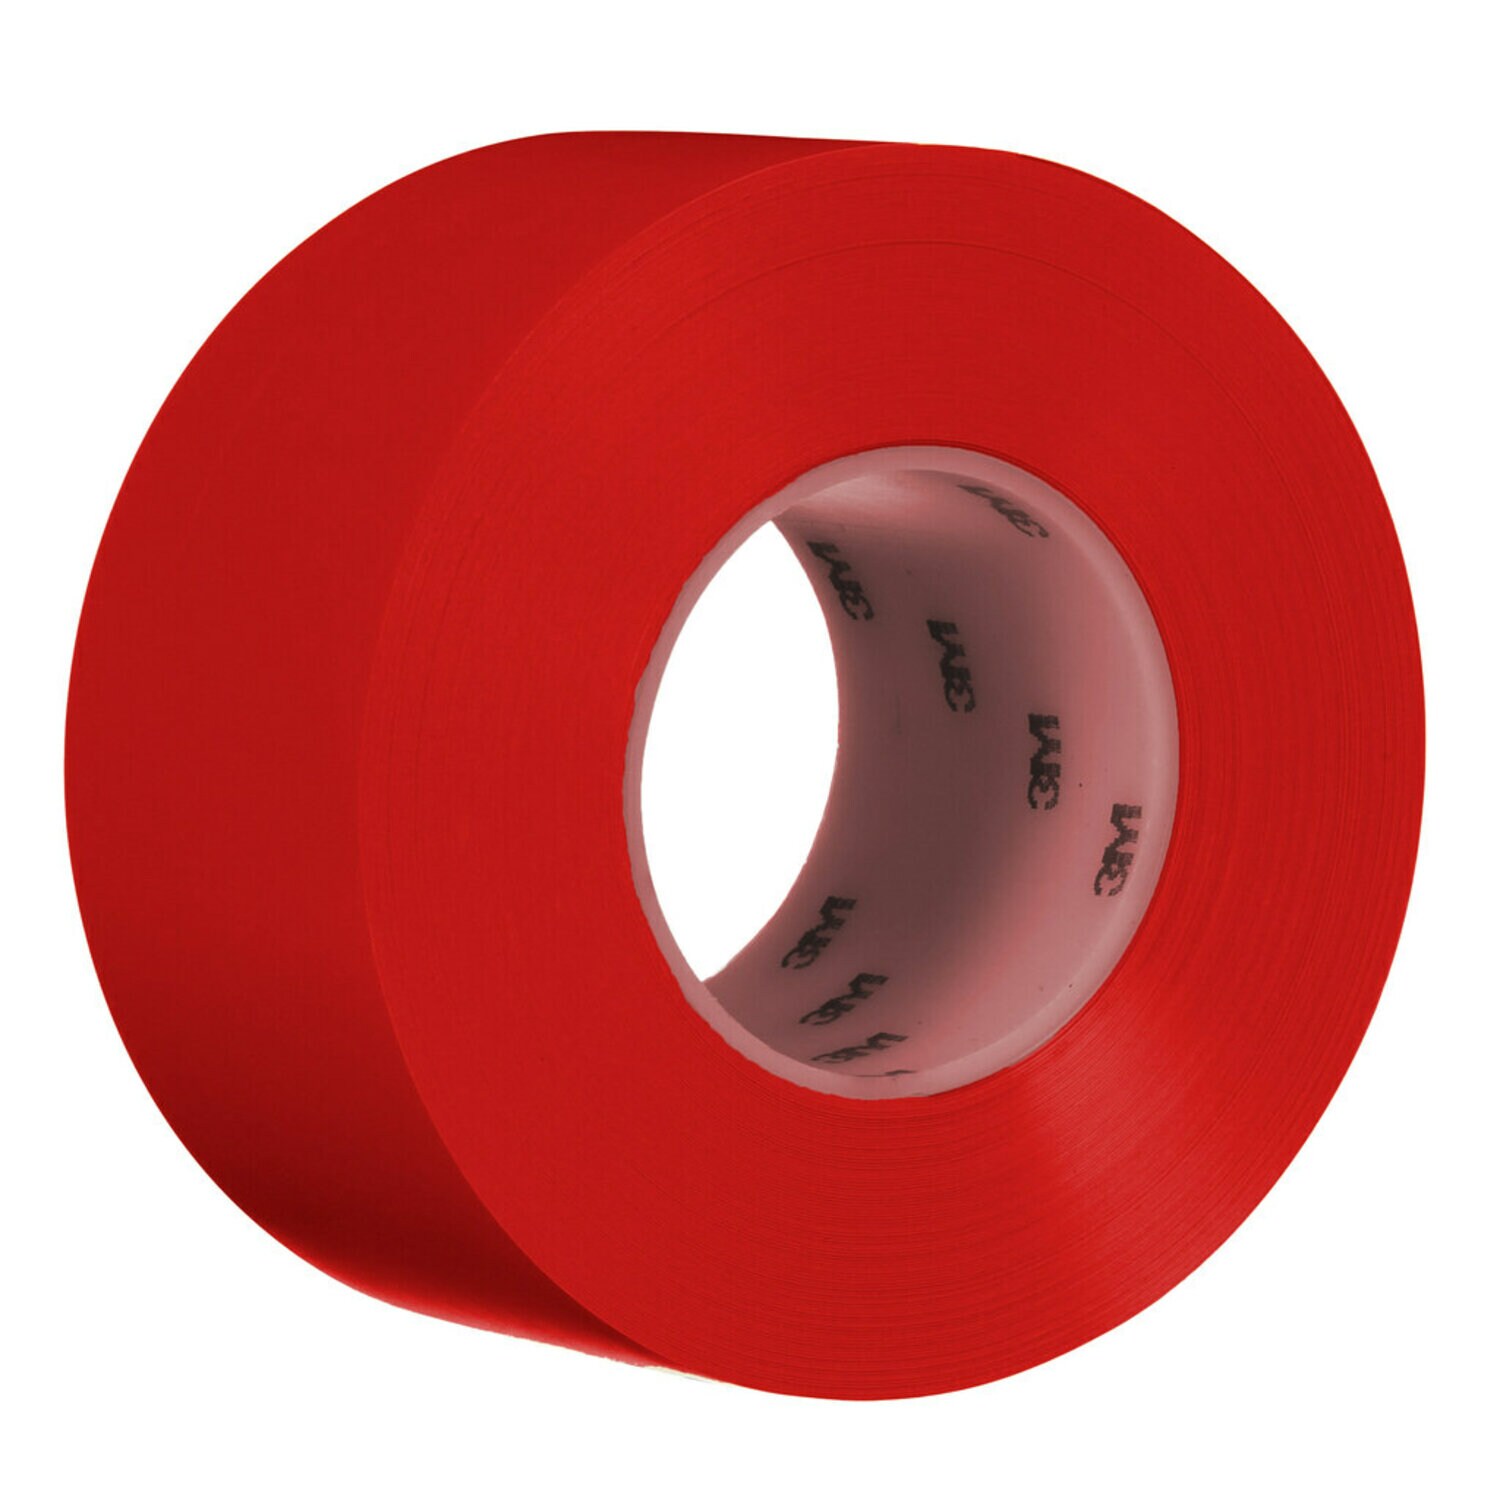 7100260624 - 3M Durable Floor Marking Tape 971, Red, 3 in x 36 yd, 17 mil, 4 Rolls/Case, Individually Wrapped Conveniently Packaged